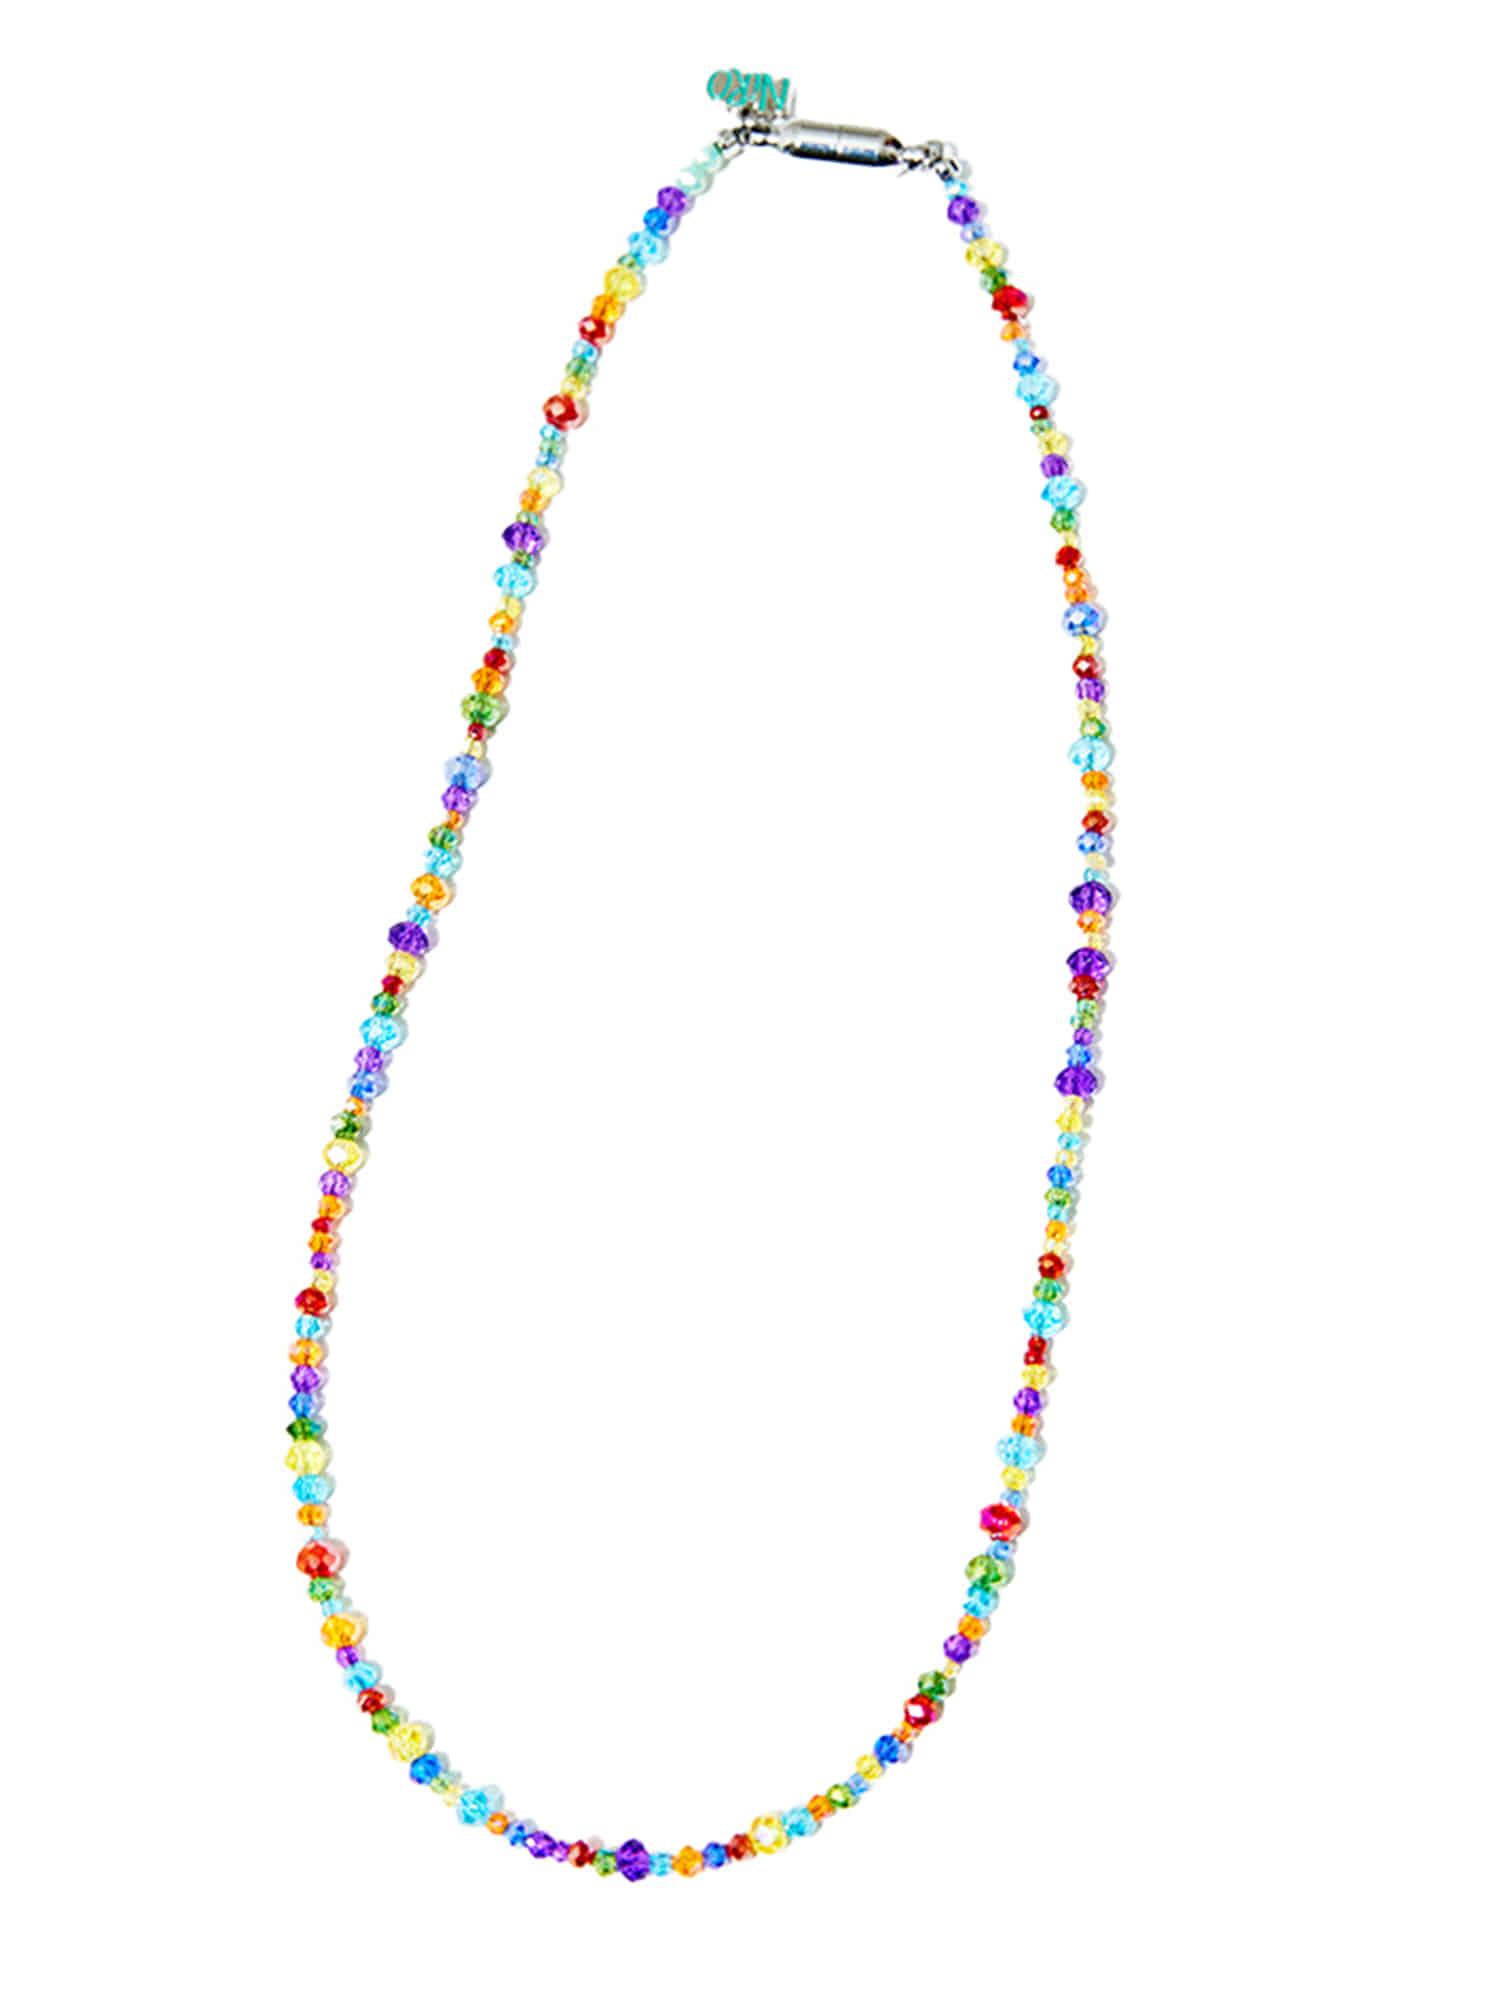 Rainbow Bling Beads Necklace #57